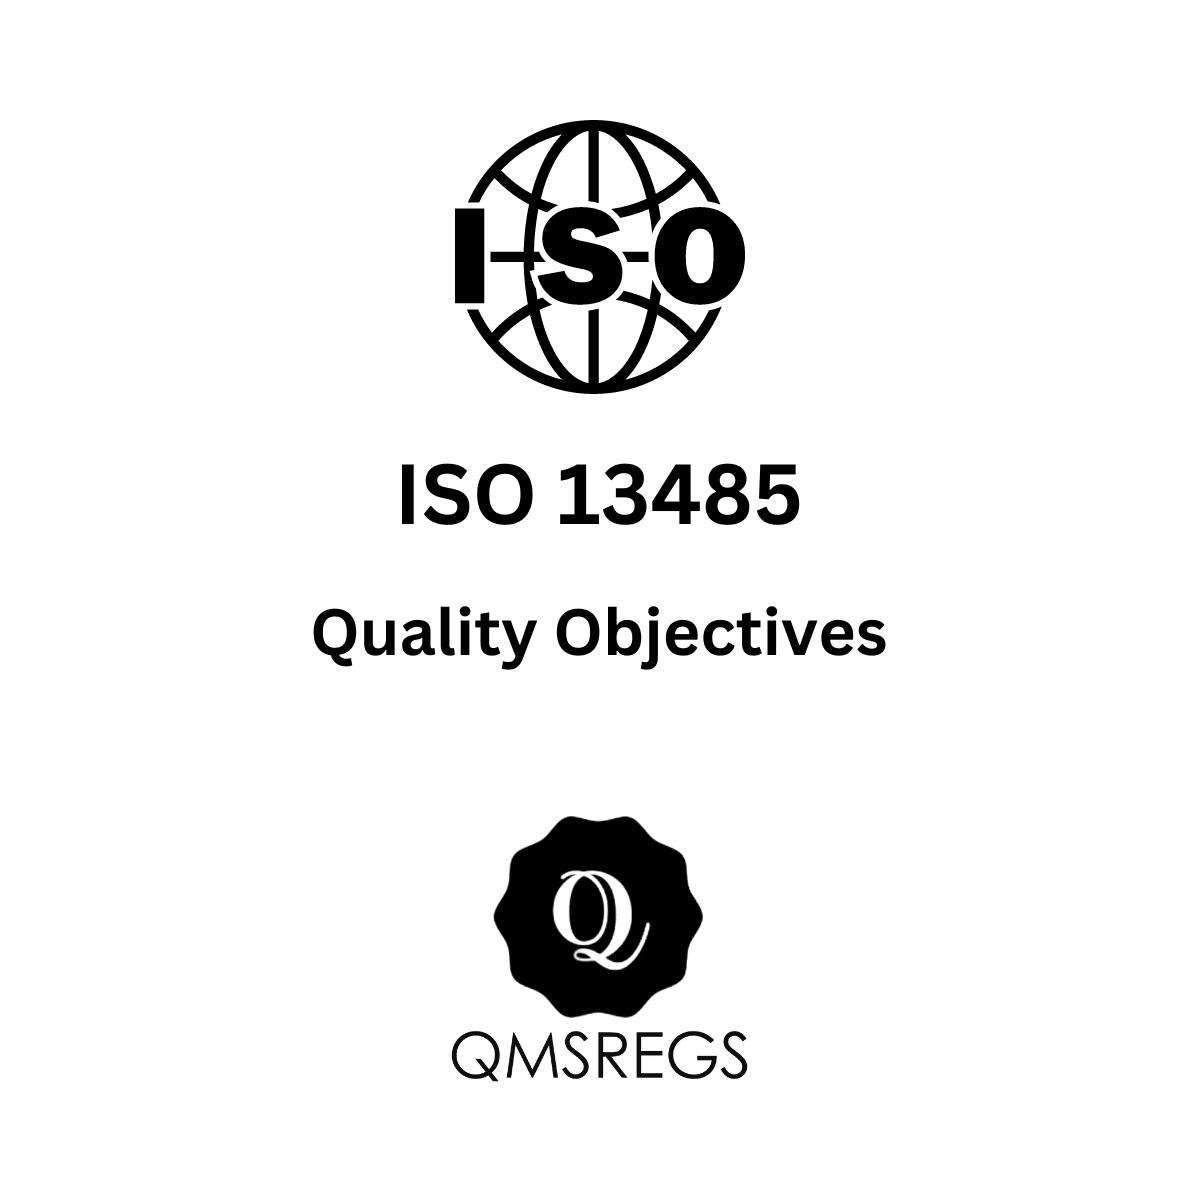 ISO 13485 Quality Objectives Template